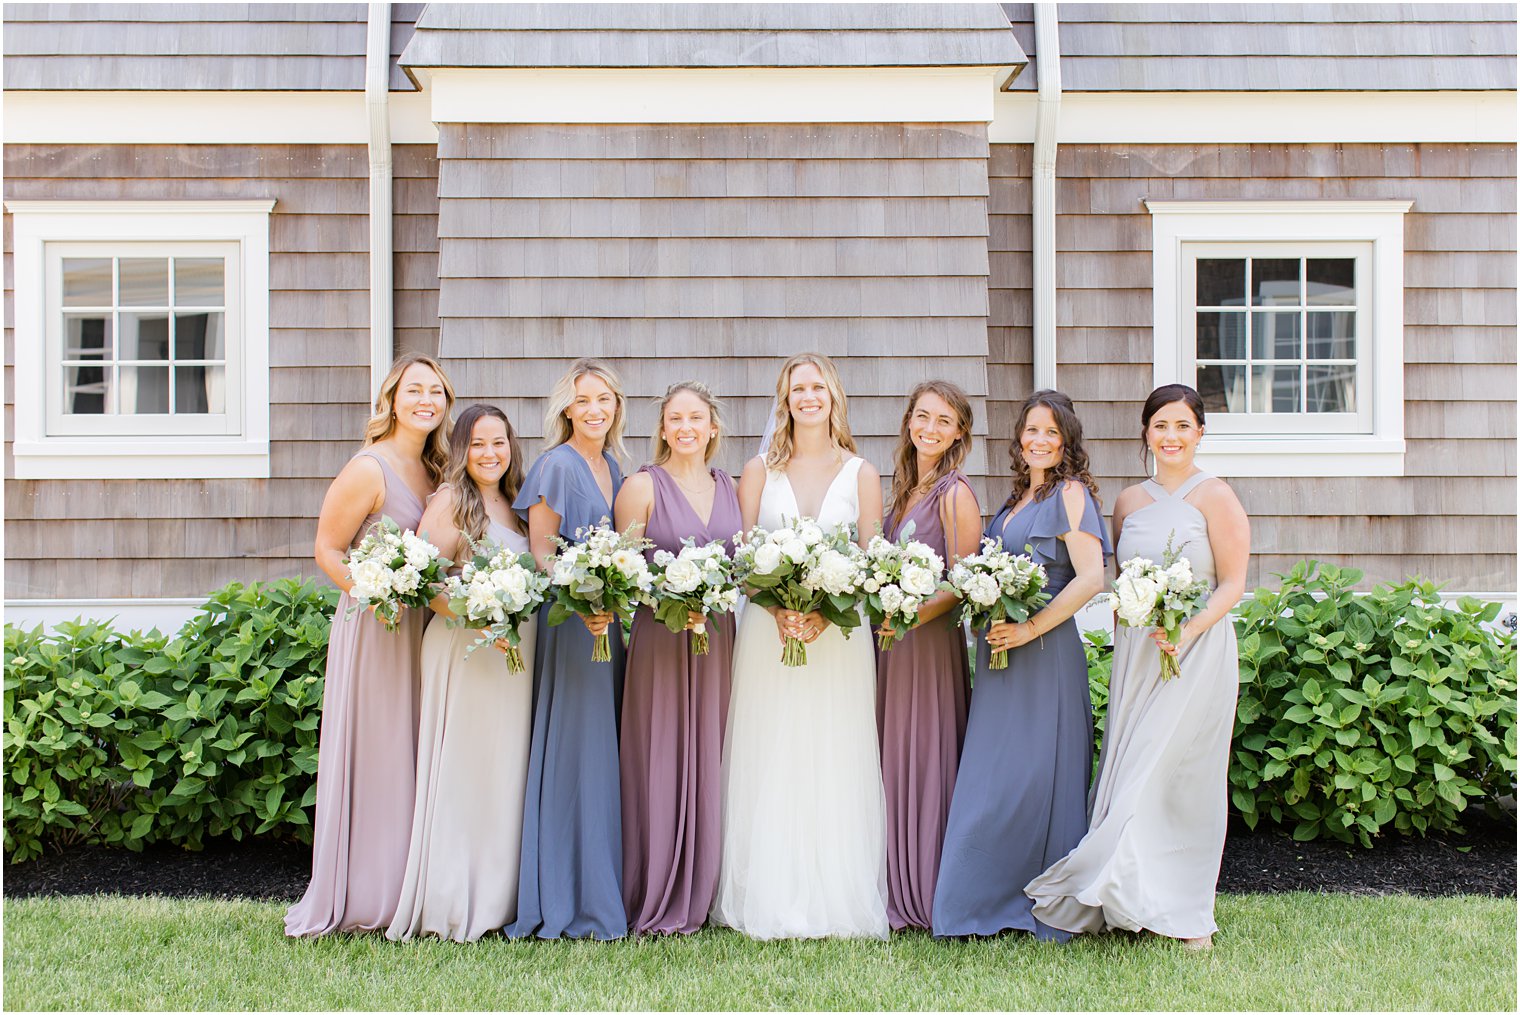 bride and bridesmaids in pink, purple and blue gowns pose outside wooden building in New Jersey 